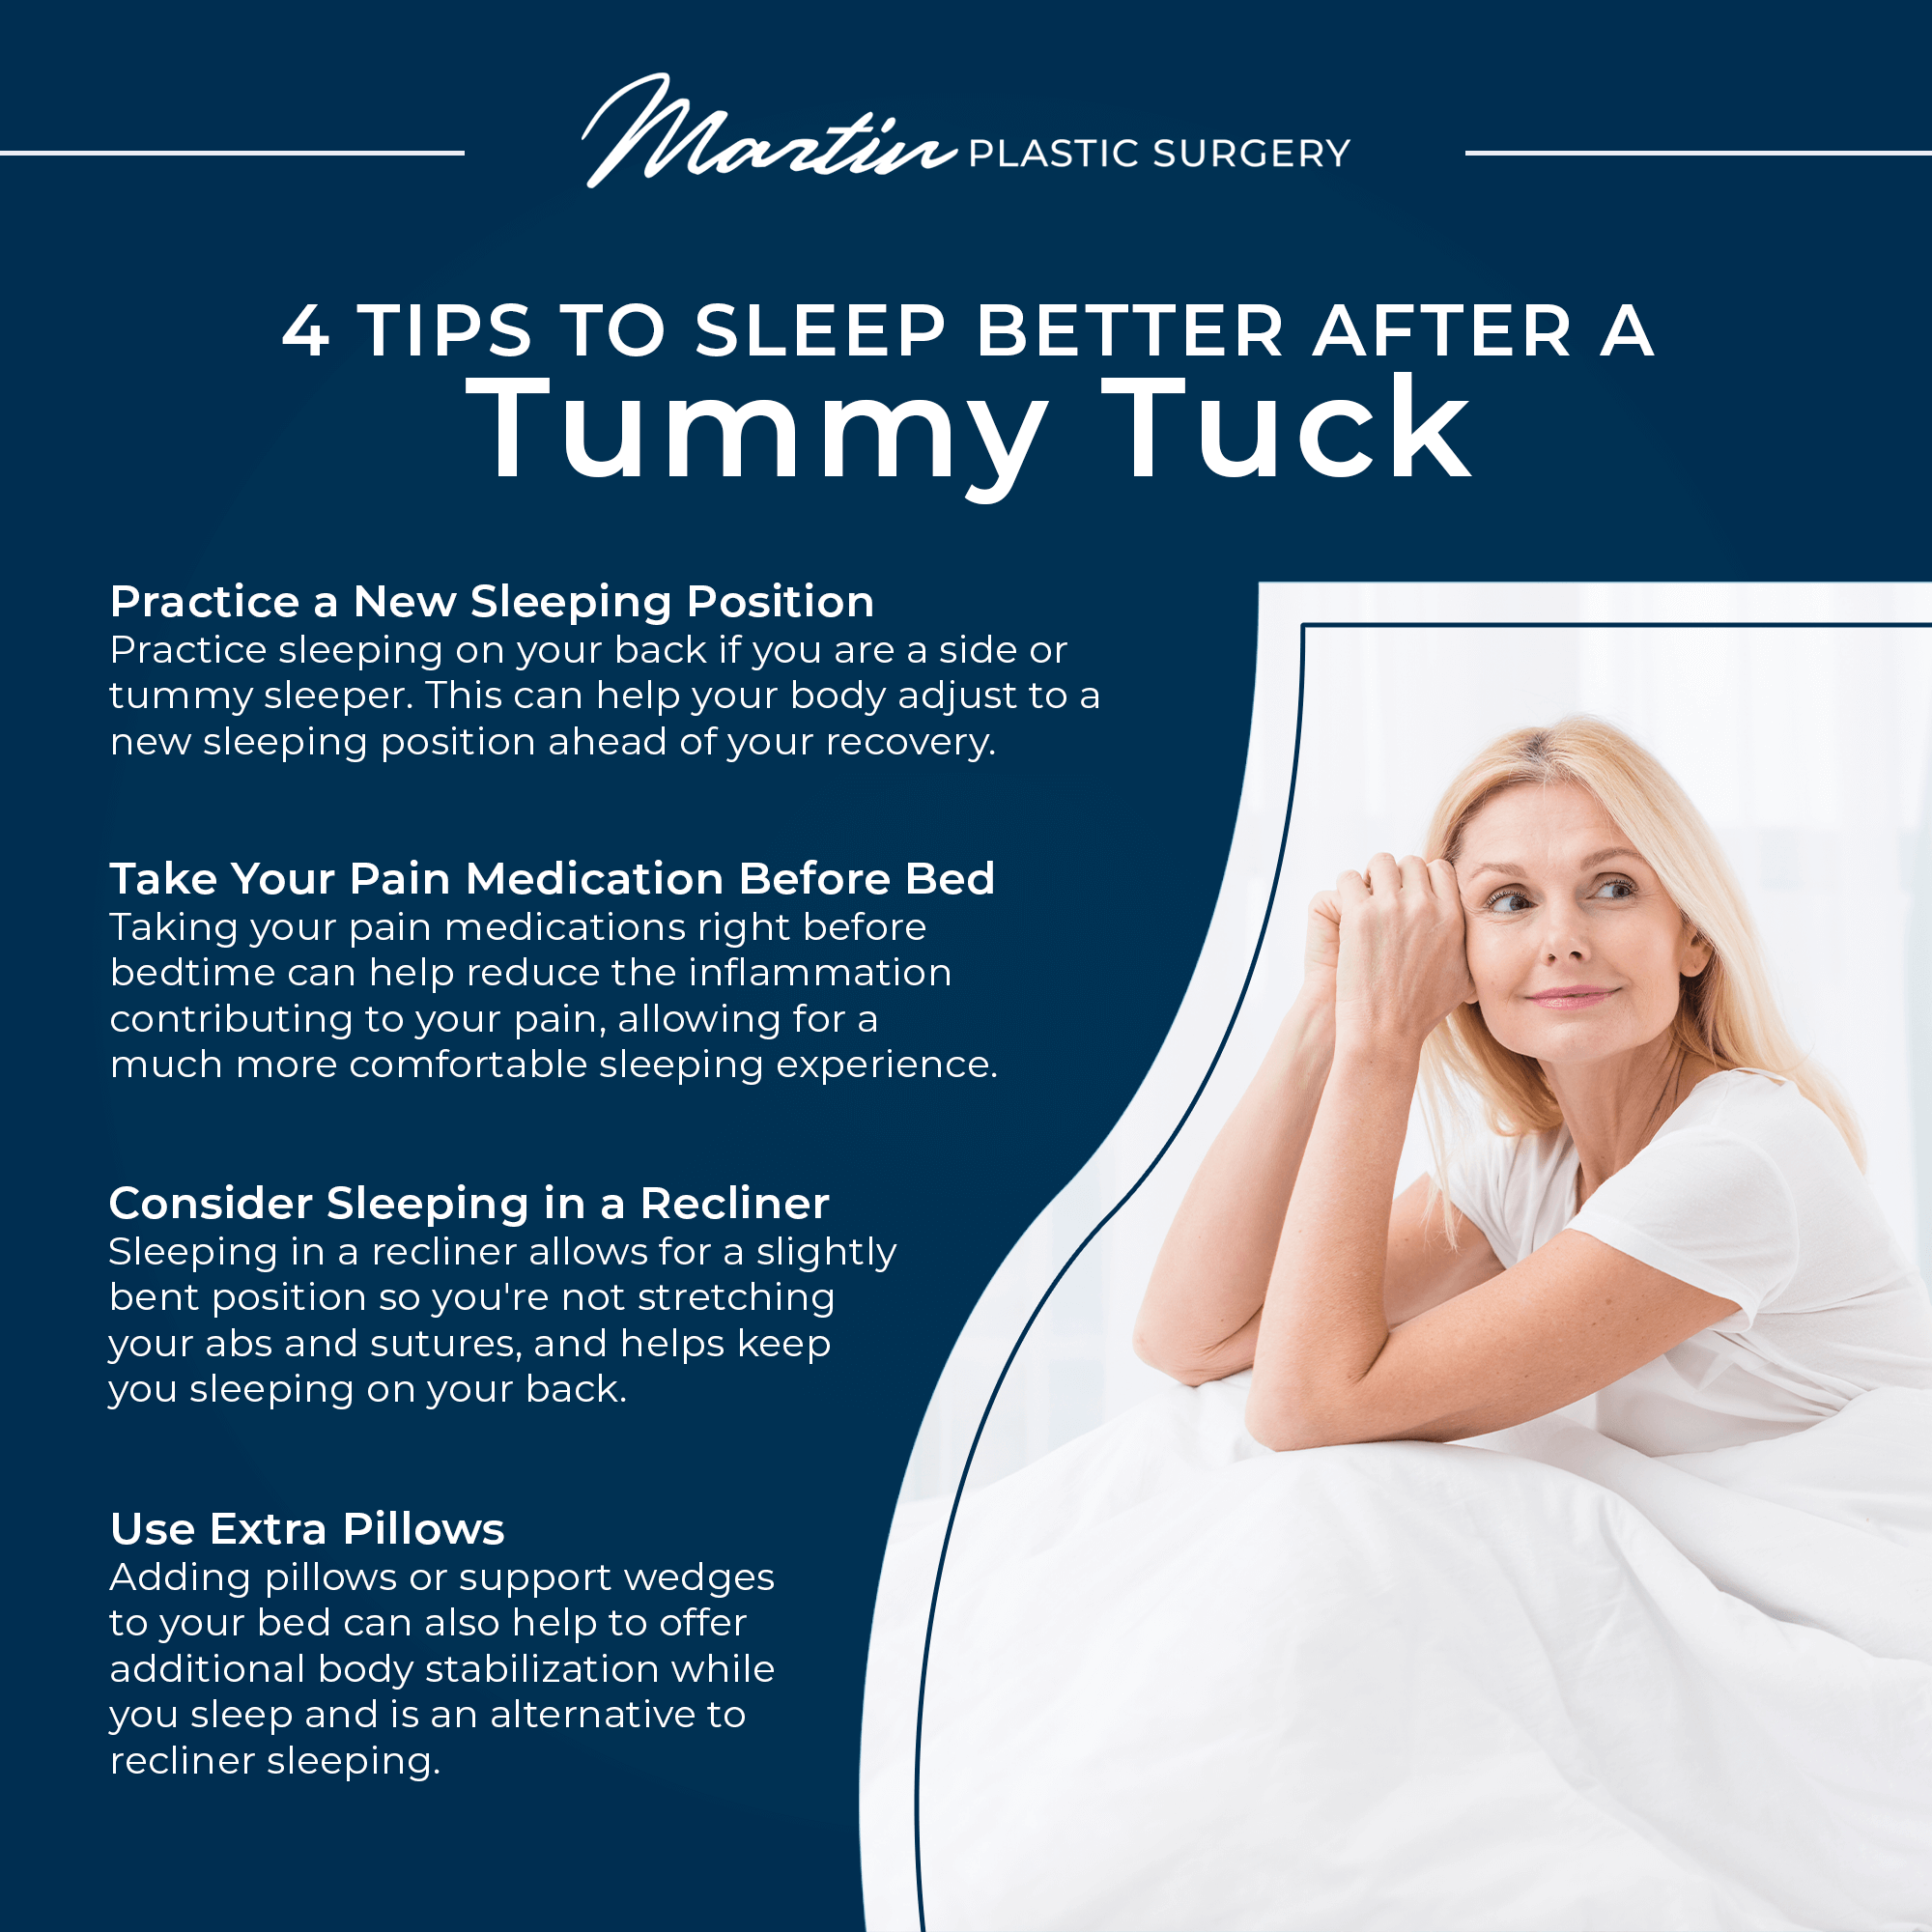 4 Tips to Sleep Better After a Tummy Tuck